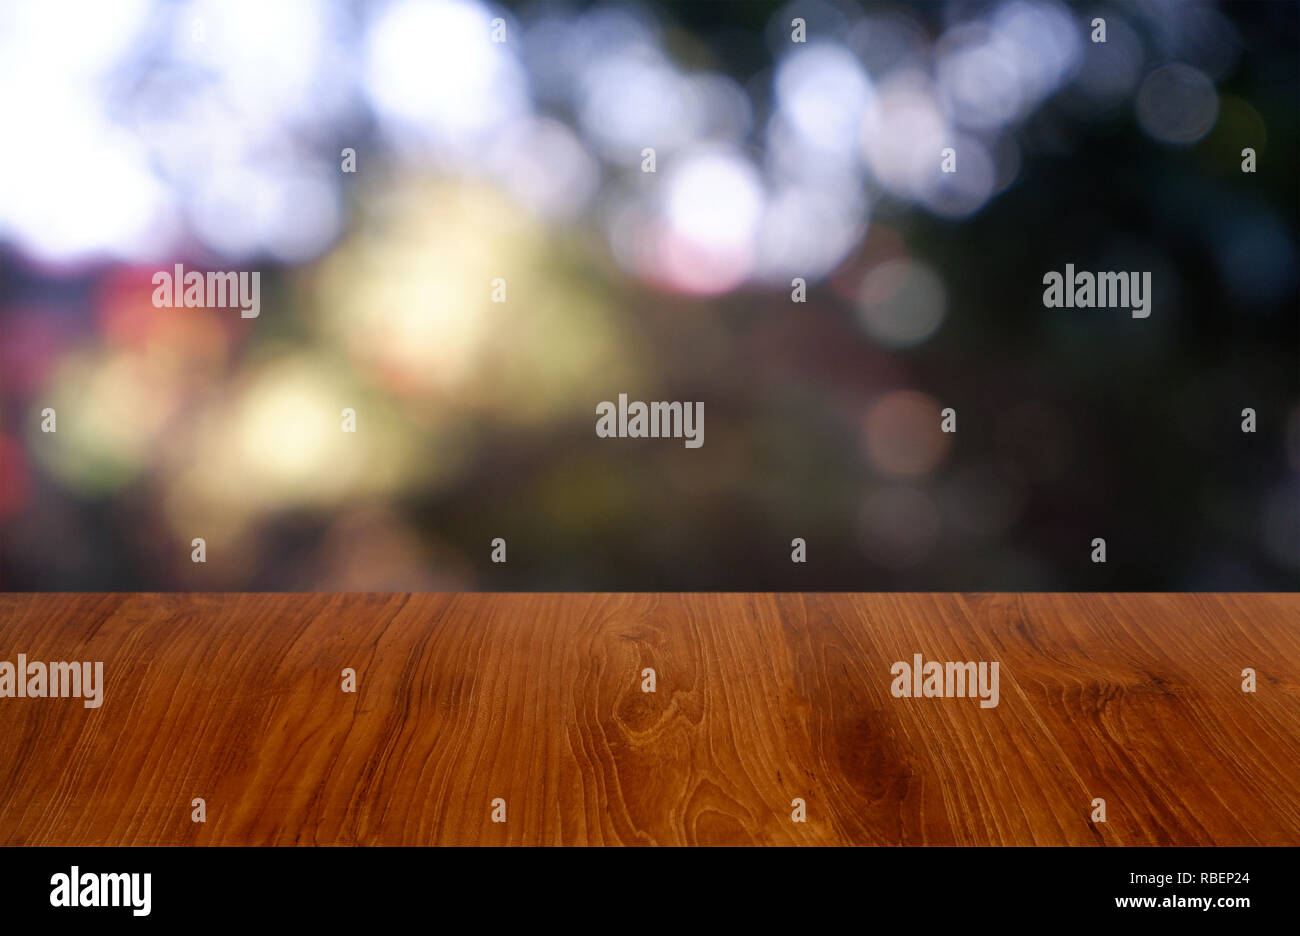 Empty wooden table in front of abstract blurred green of garden and house background. For montage product display or design key visual layout - Image Stock Photo